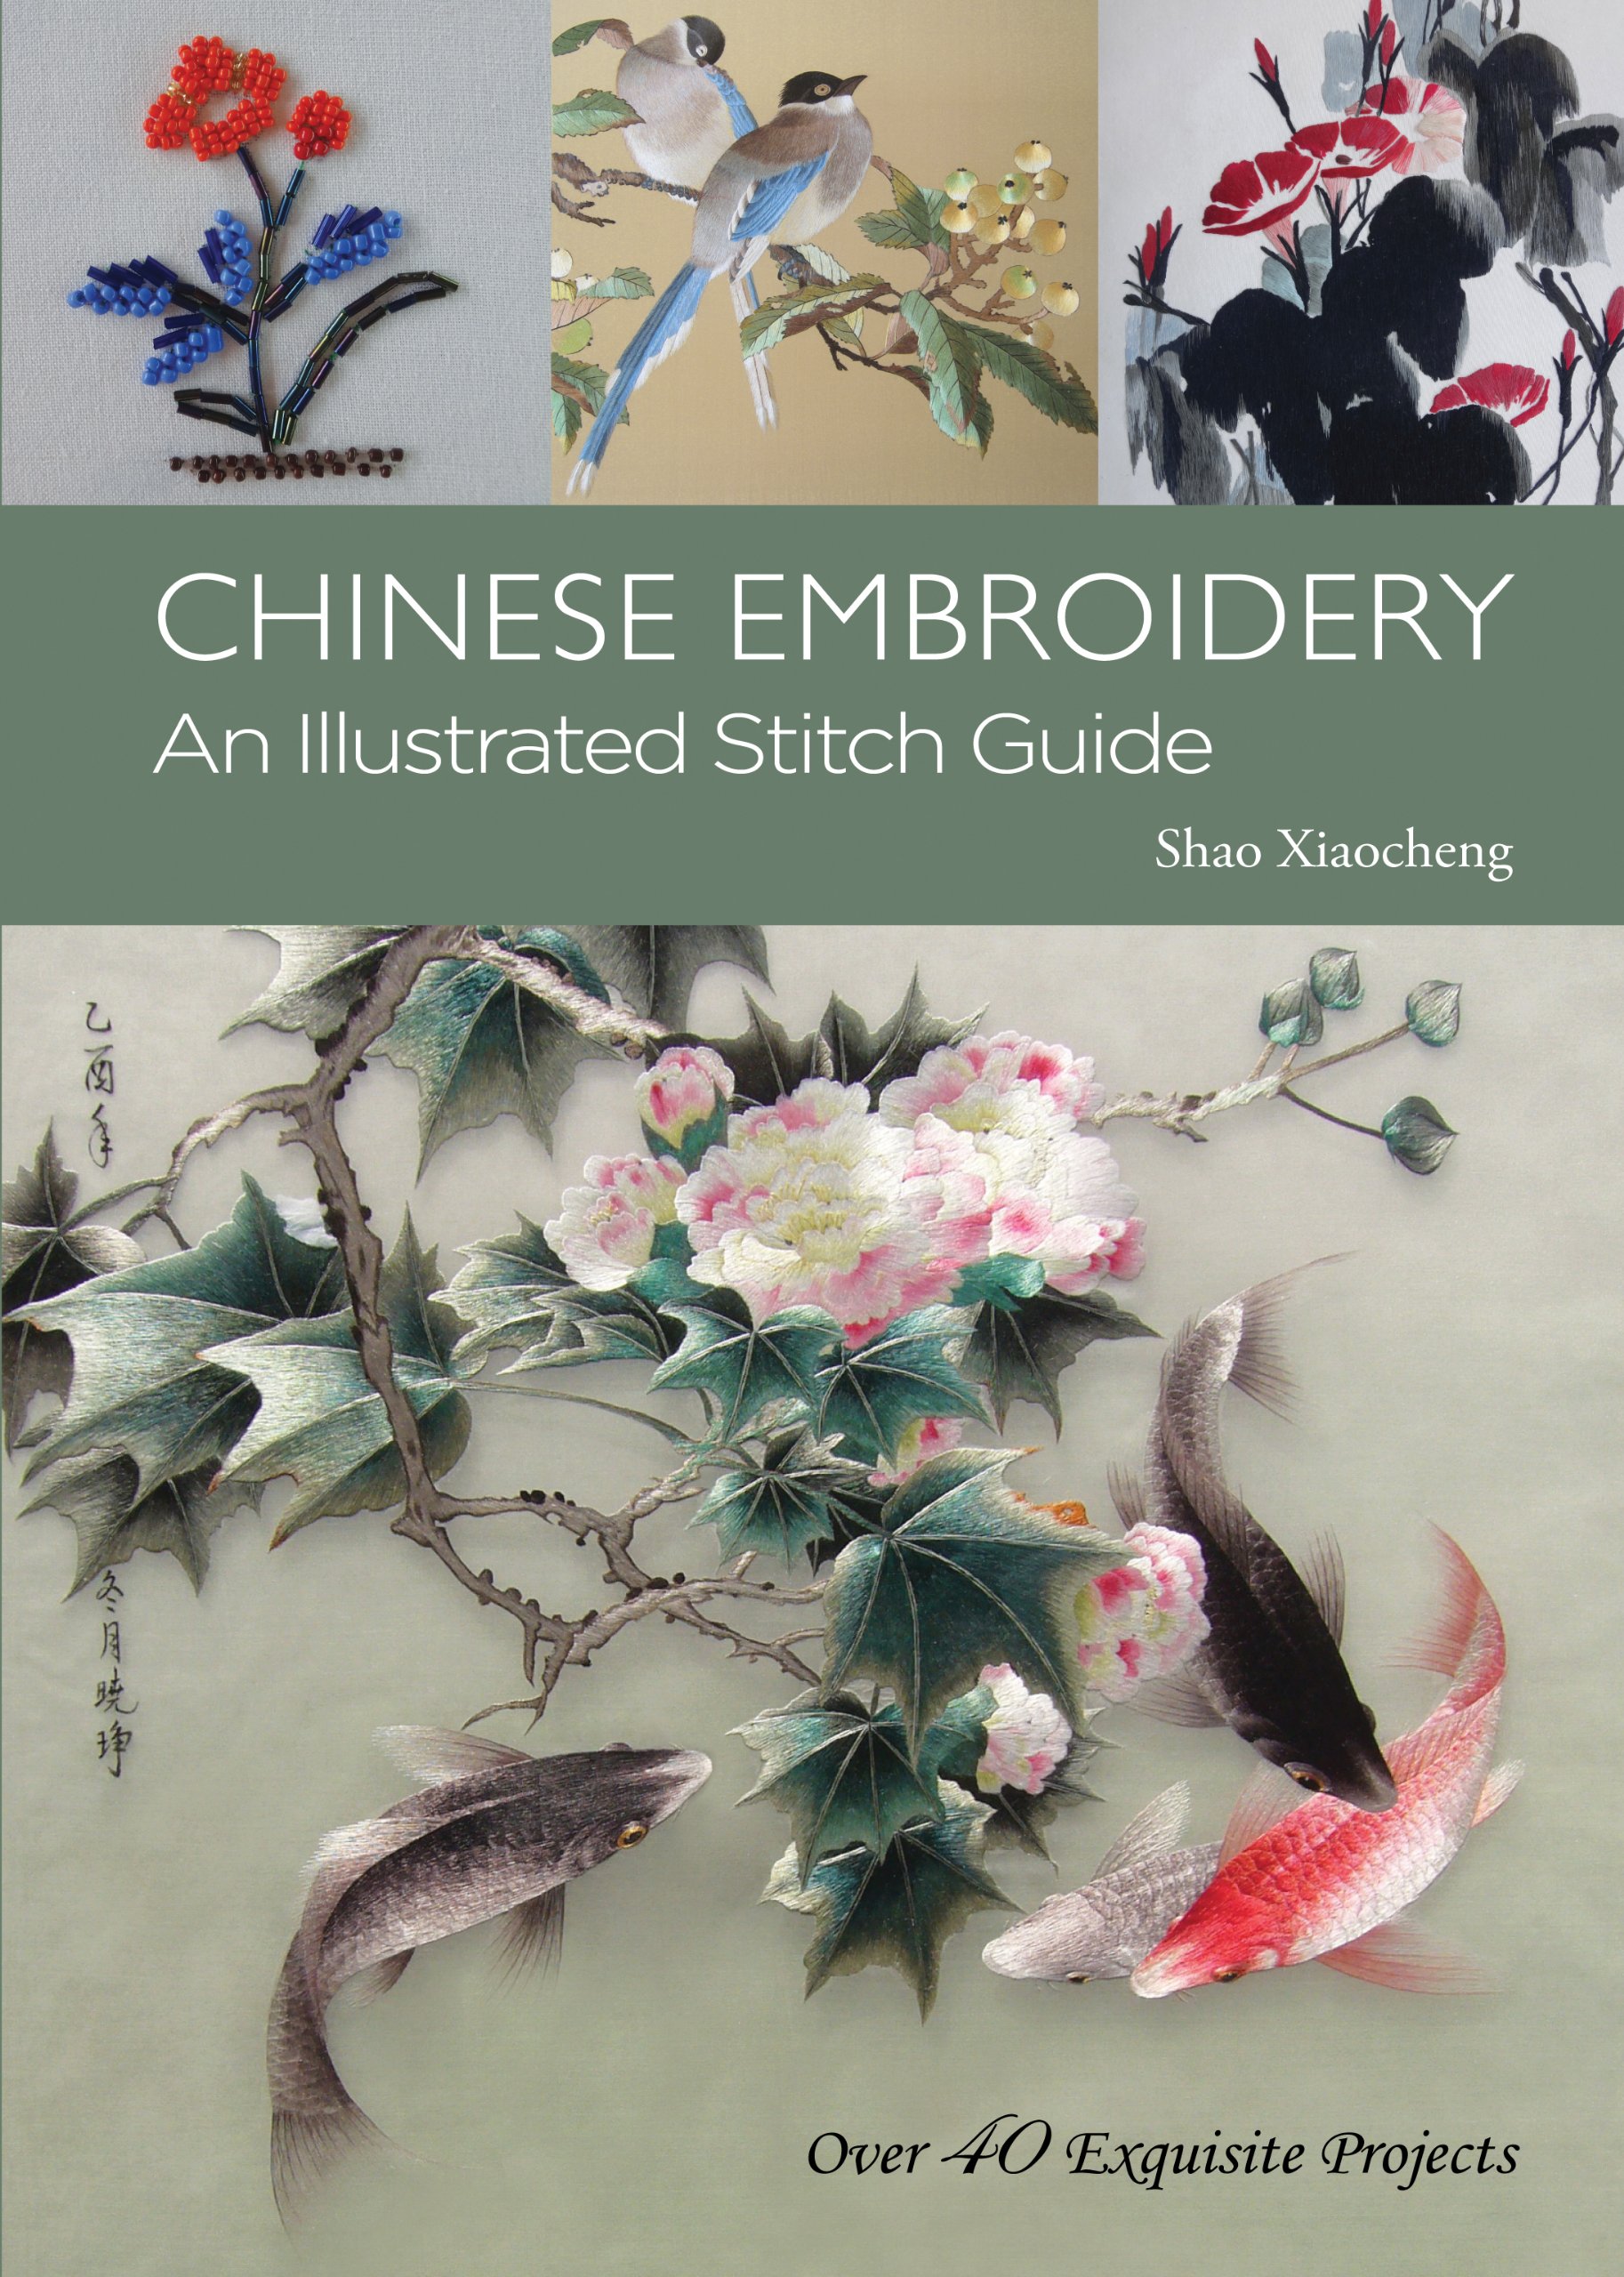 Amazon.com: Chinese Embroidery: An Illustrated Stitch Guide - 40 ...